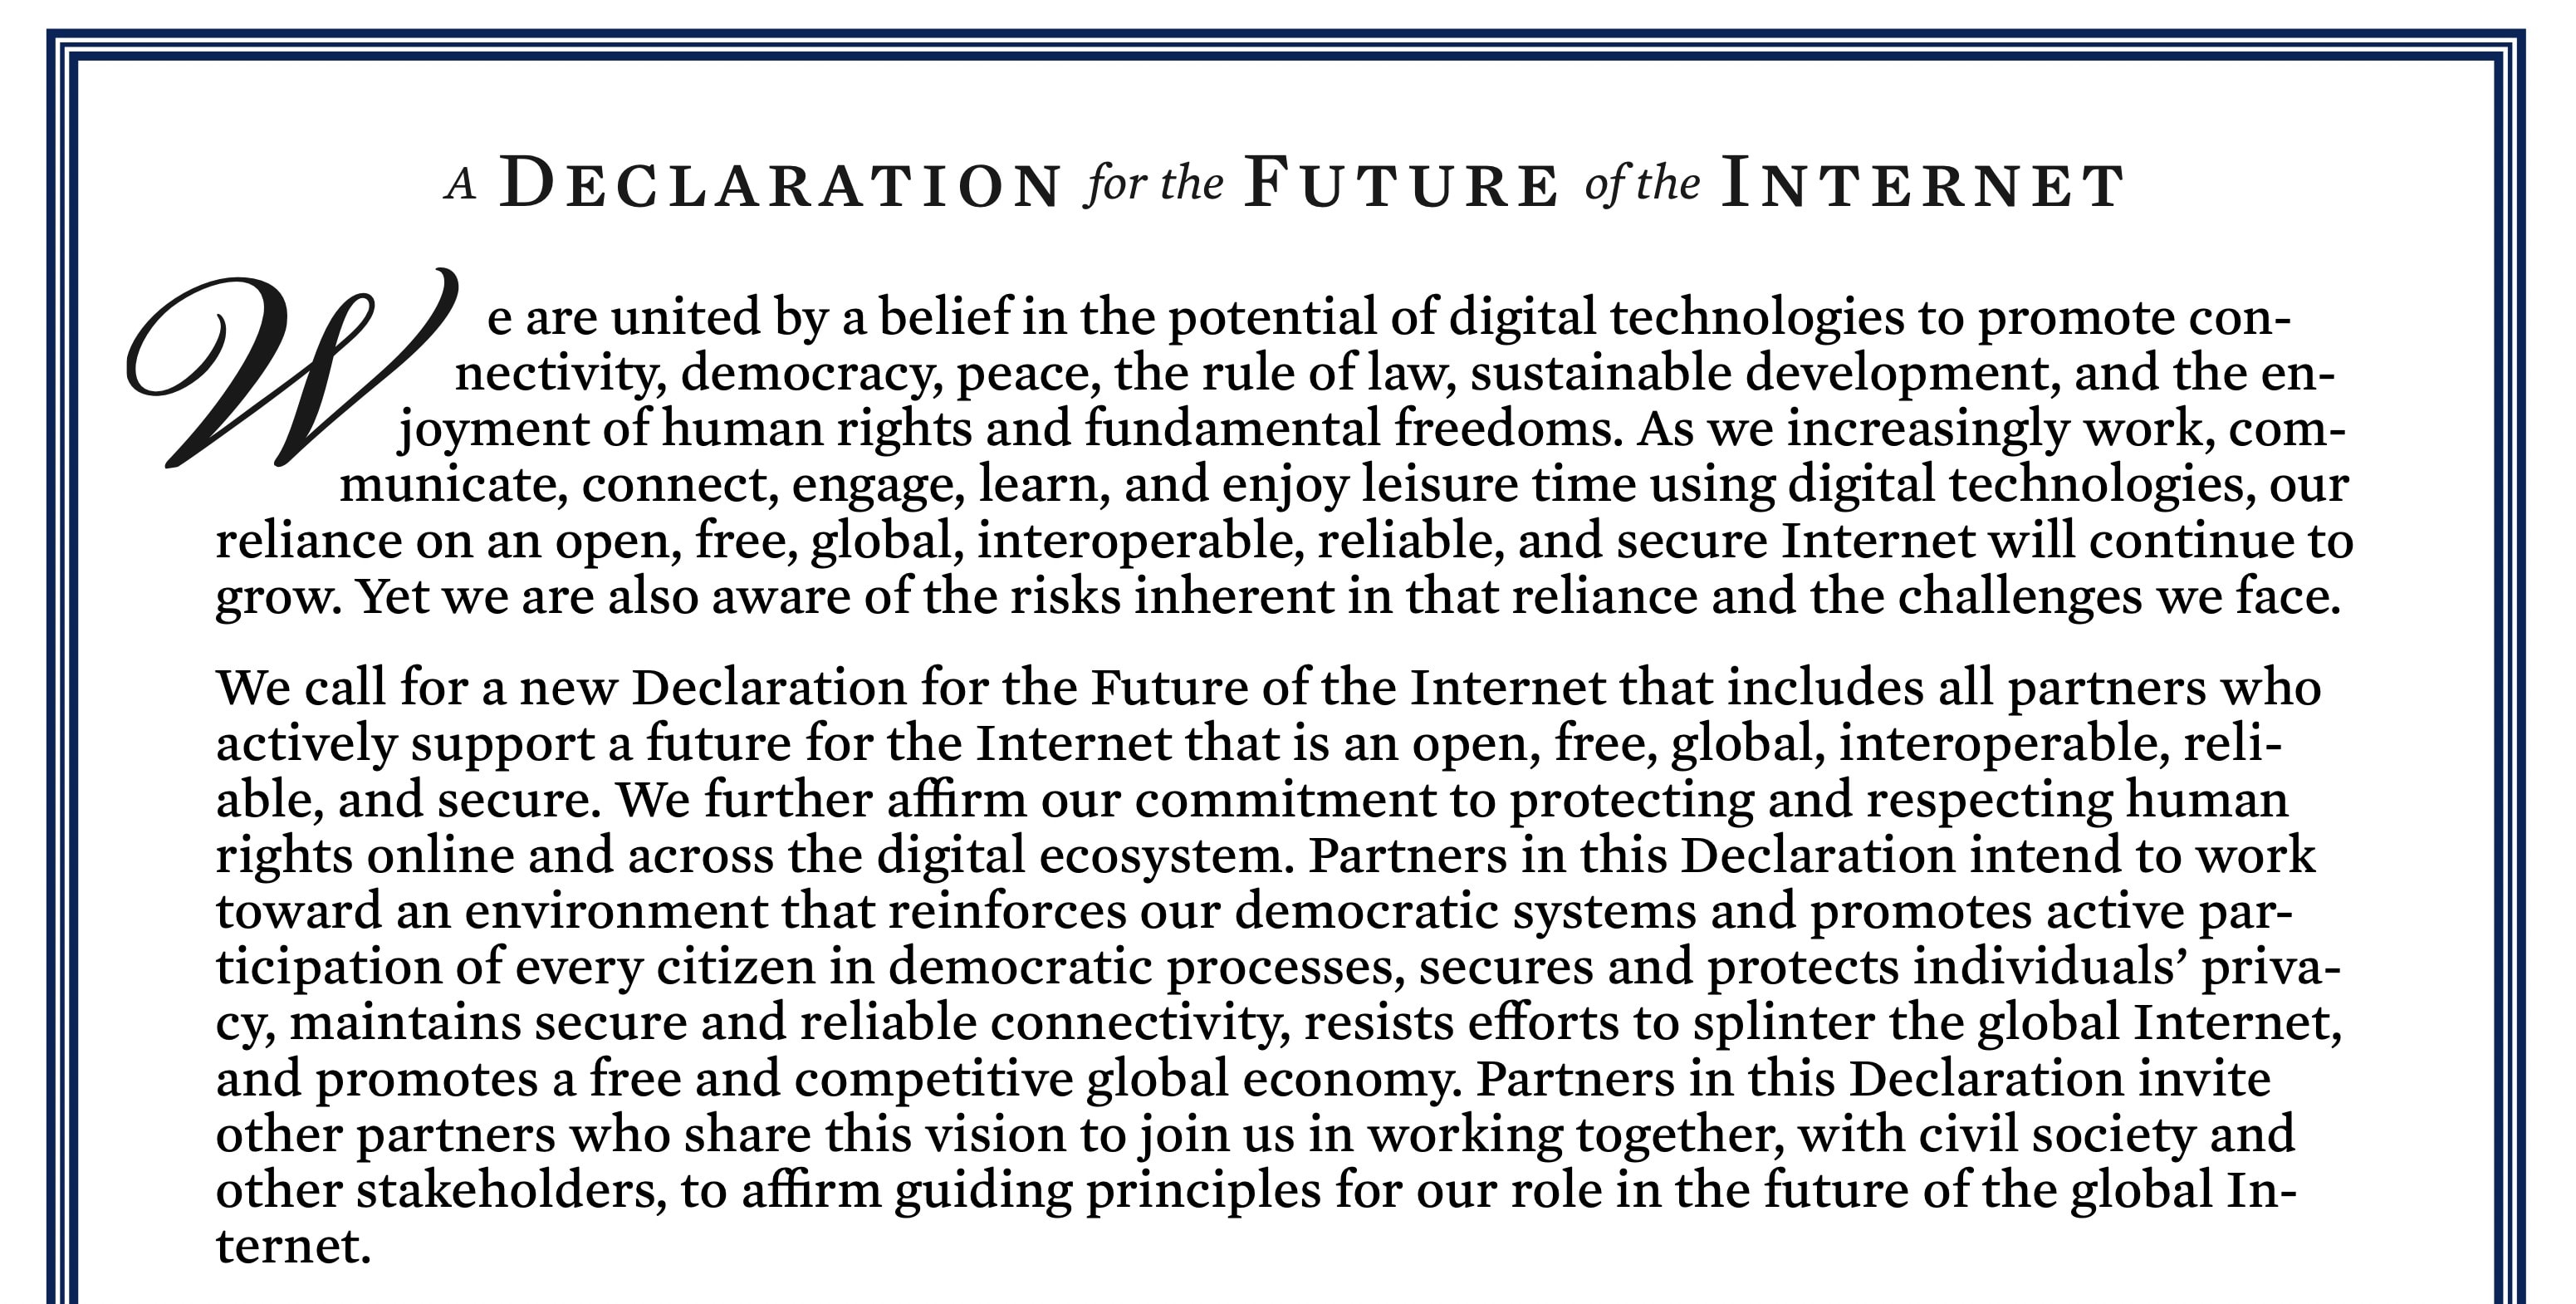 Read the top of the 2,000-word Declaration for the Future of the Internet.